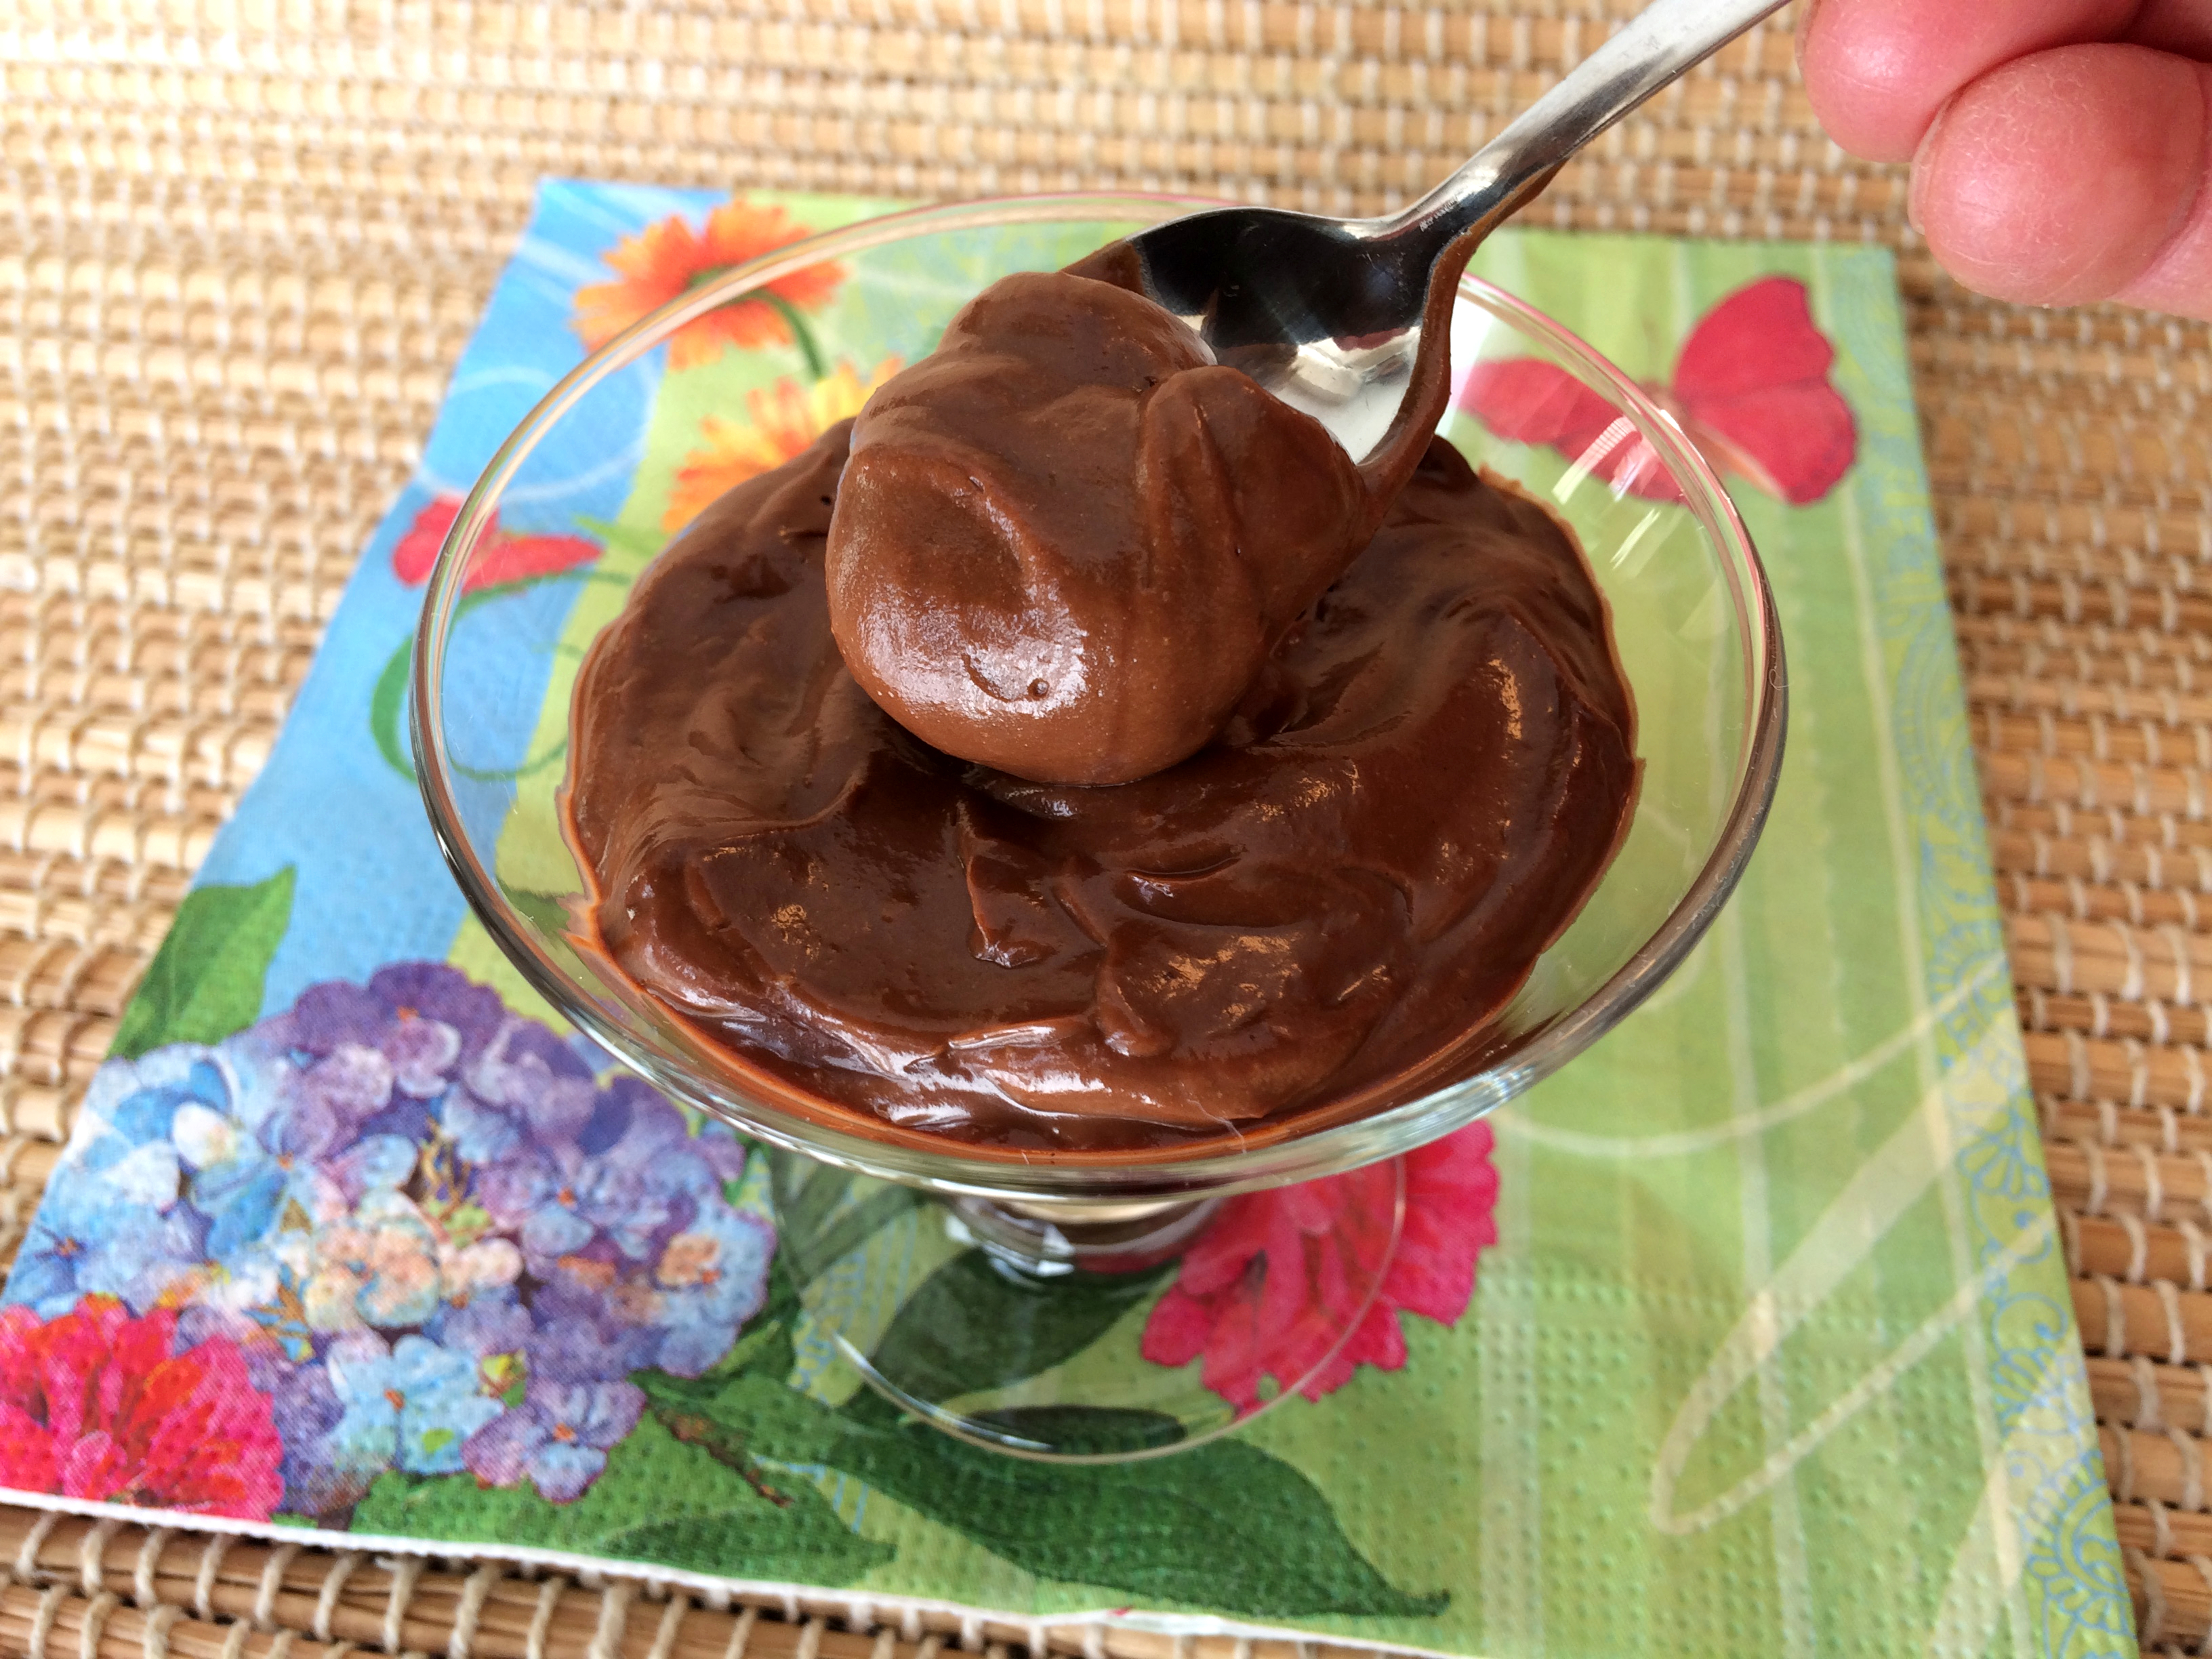 Spooning up some creamy, rich chocolate pudding without sugar, gluten, eggs or dairy